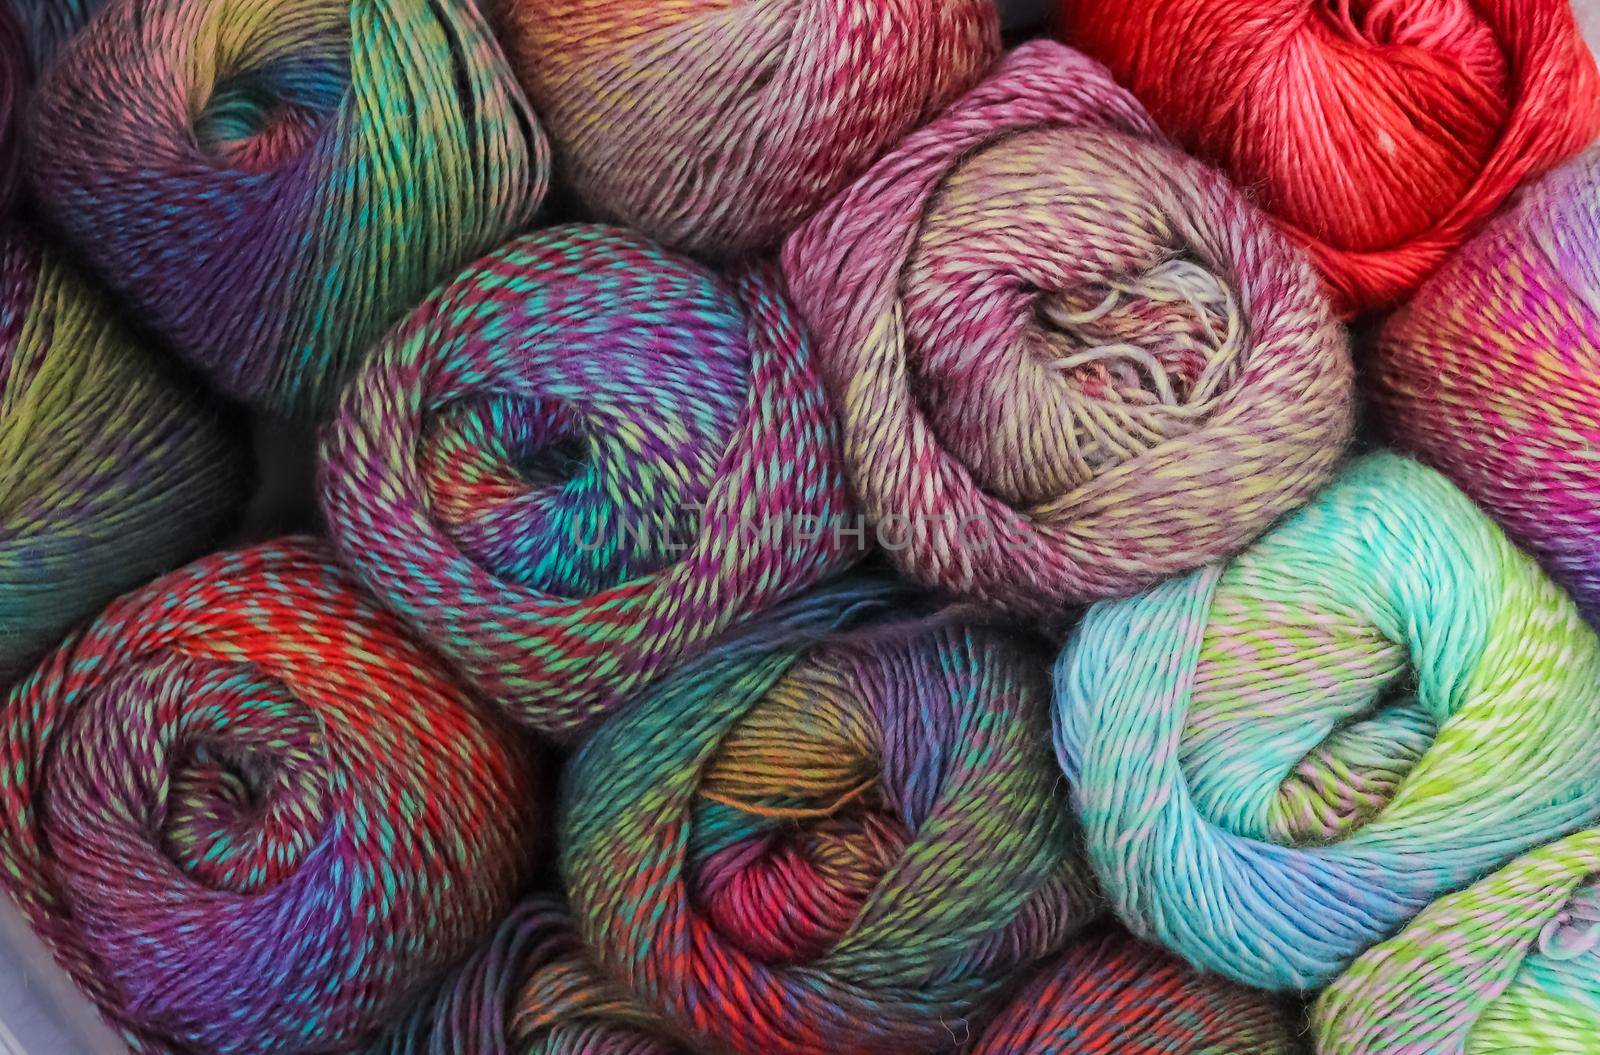 Several rolls of yarn picked up from above